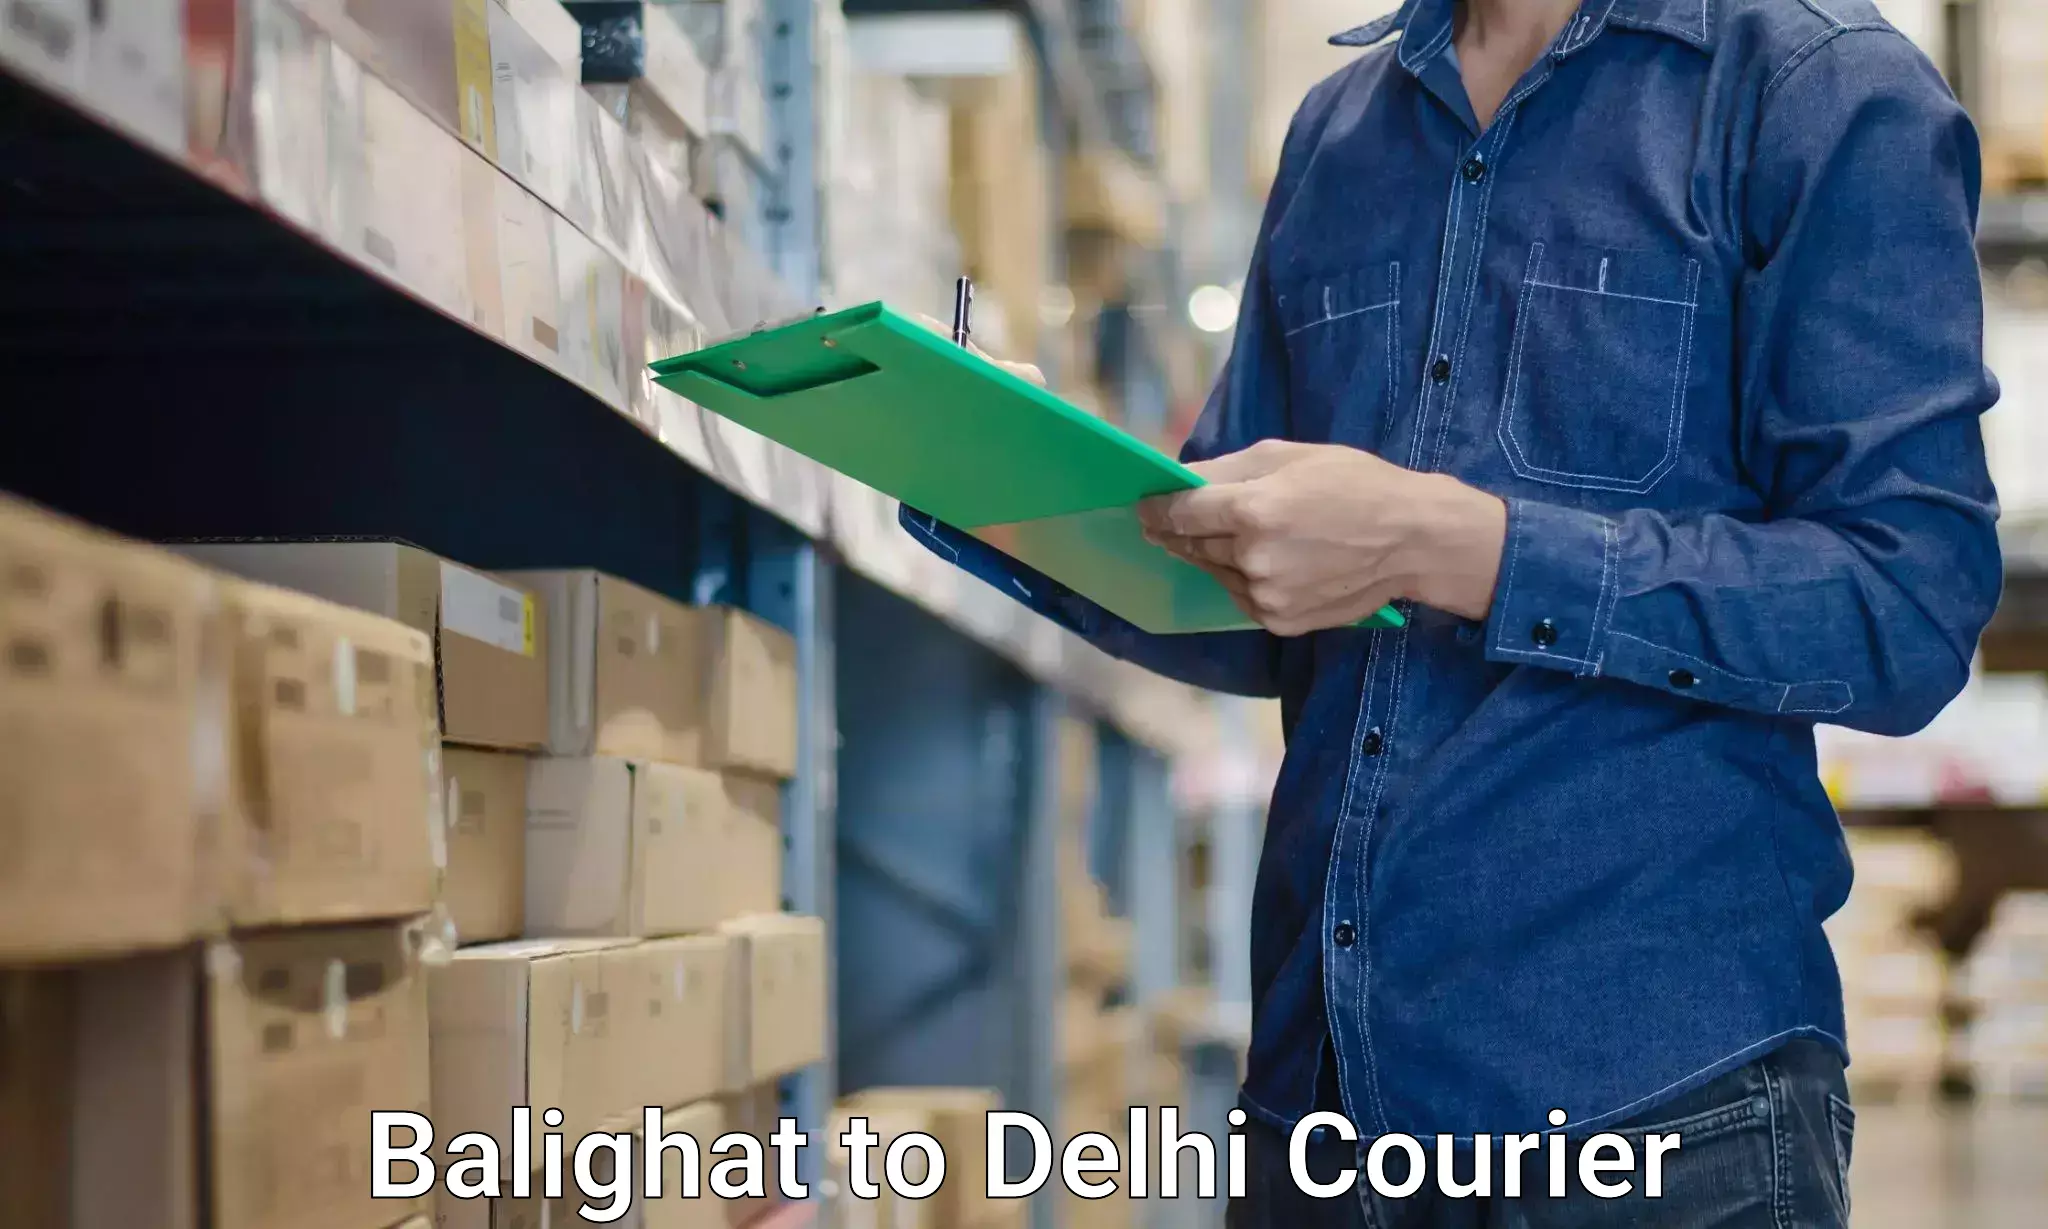 Professional moving company Balighat to Lodhi Road